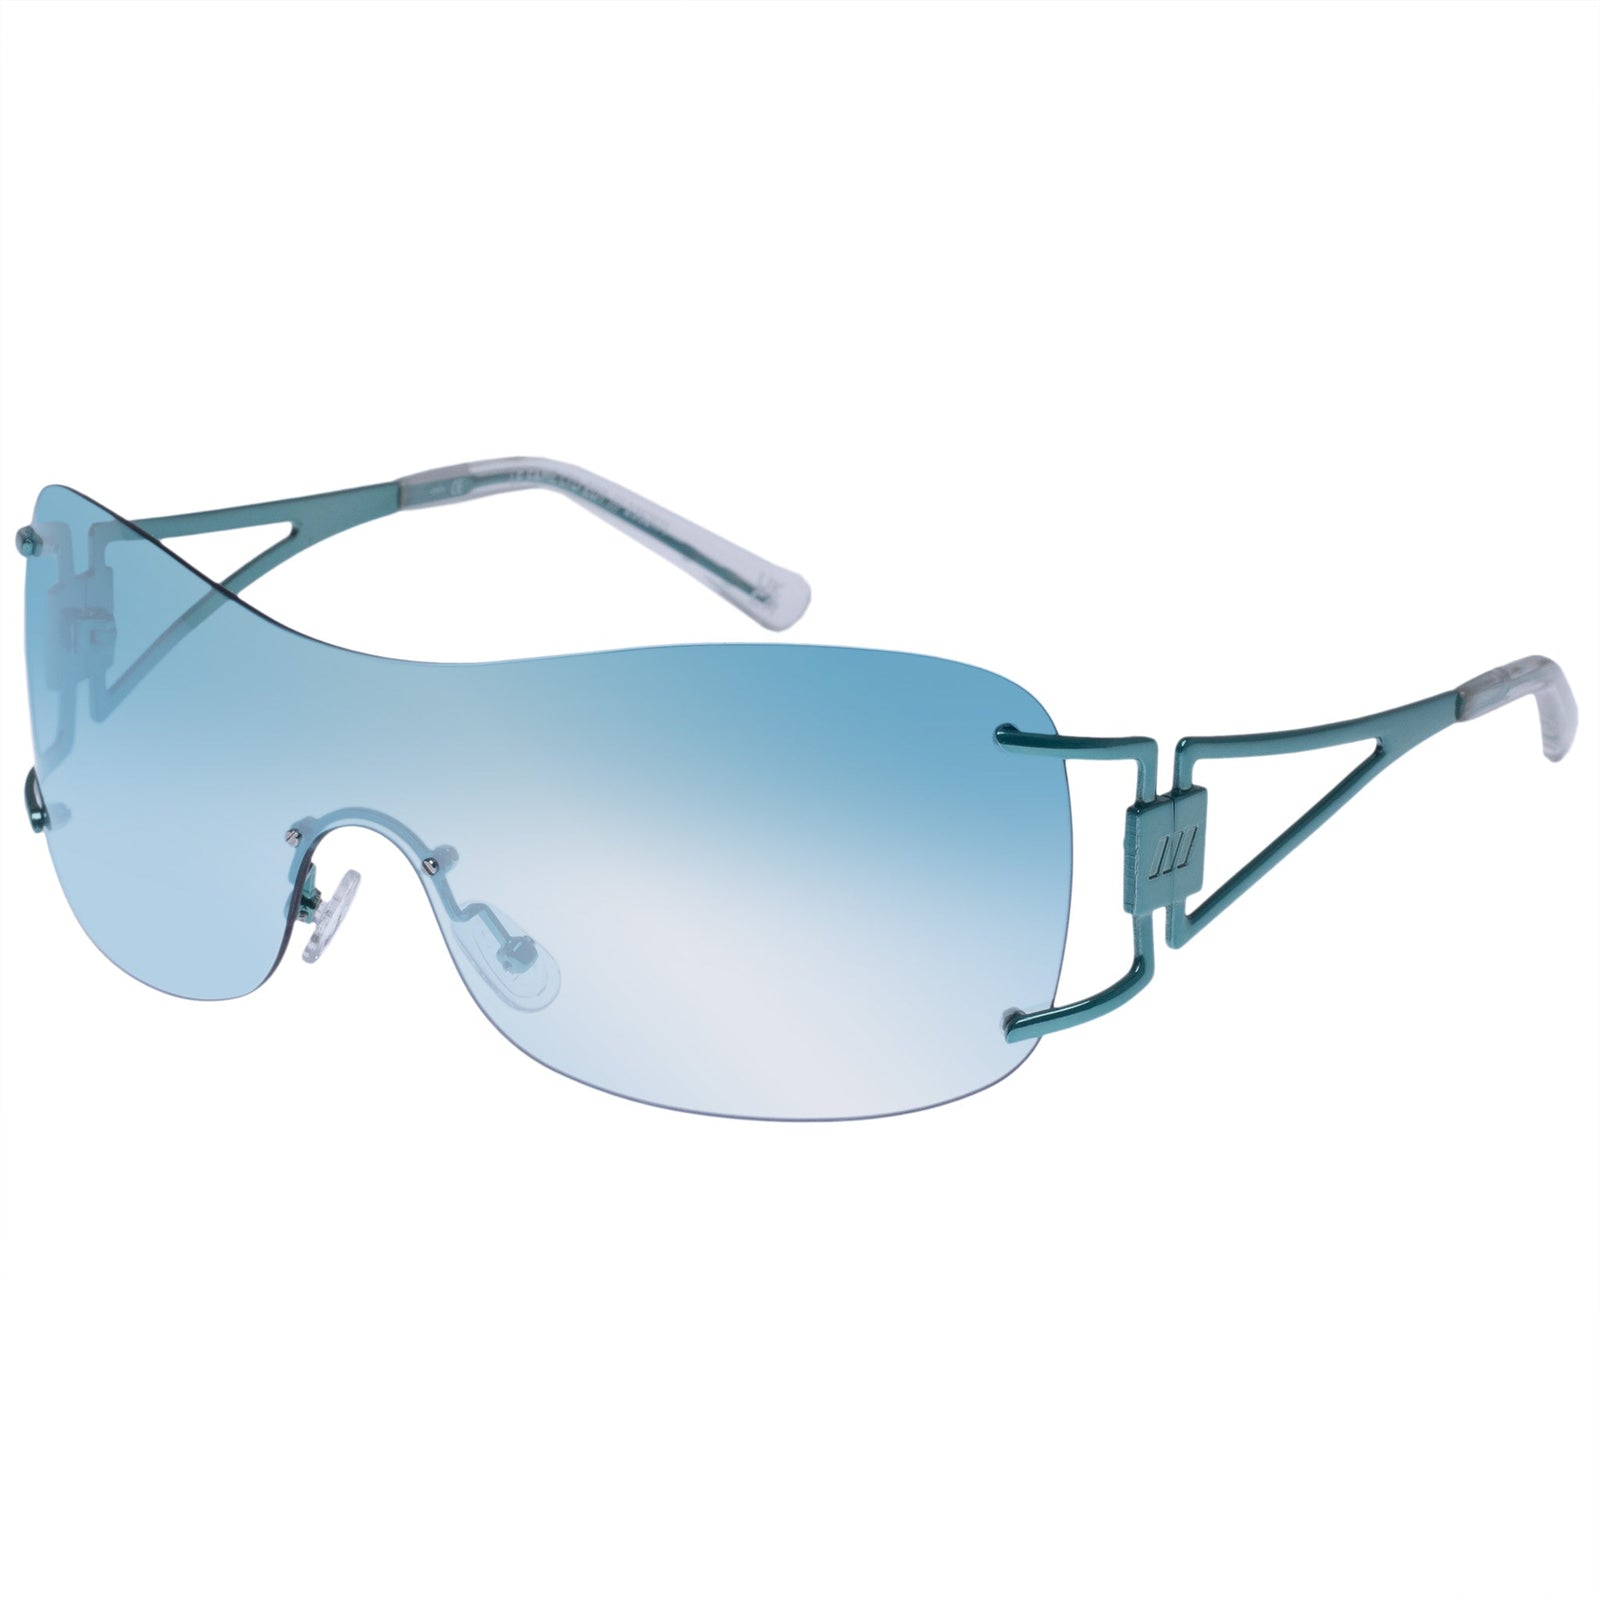 Skylark Blue Blocker Extra Large Fit Cover Over RX Glasses Sunglasses Safety Drive Put, adult Unisex, Size: One Size